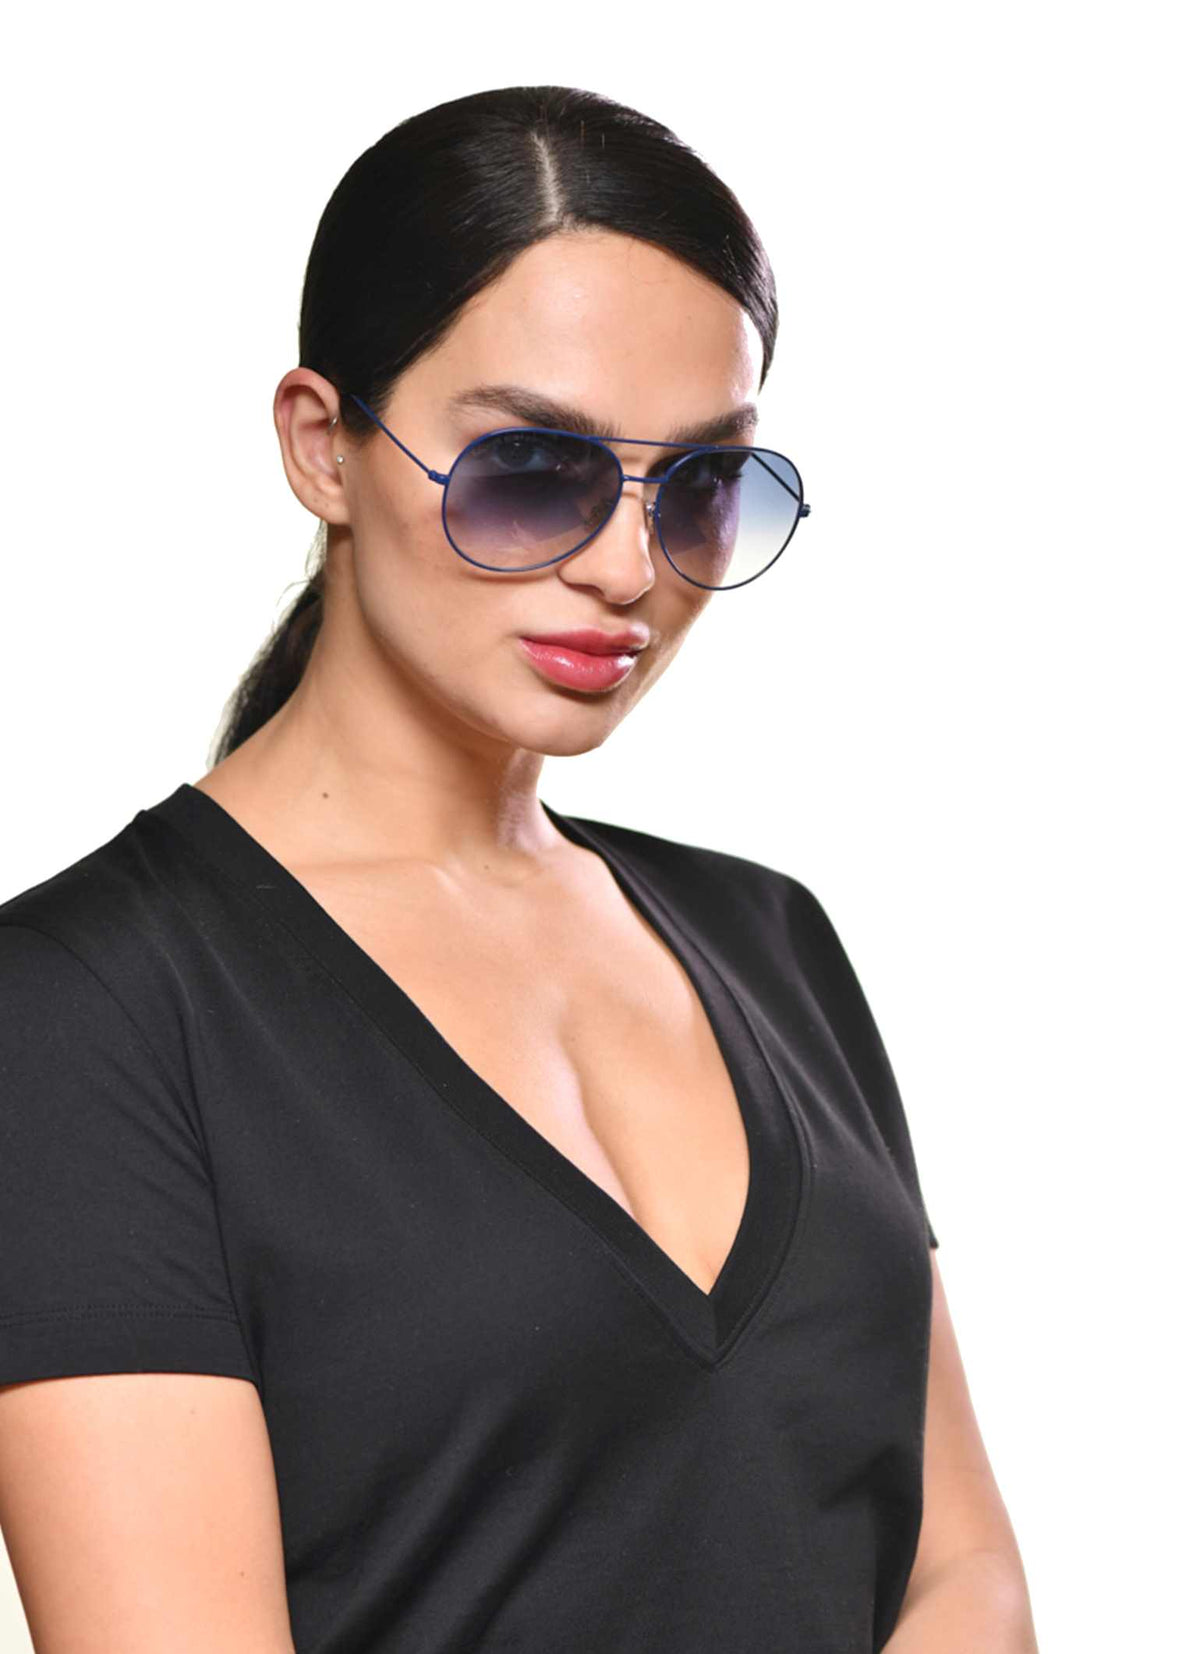 Black t-shirt with V neck and sunglasses aviator style for women